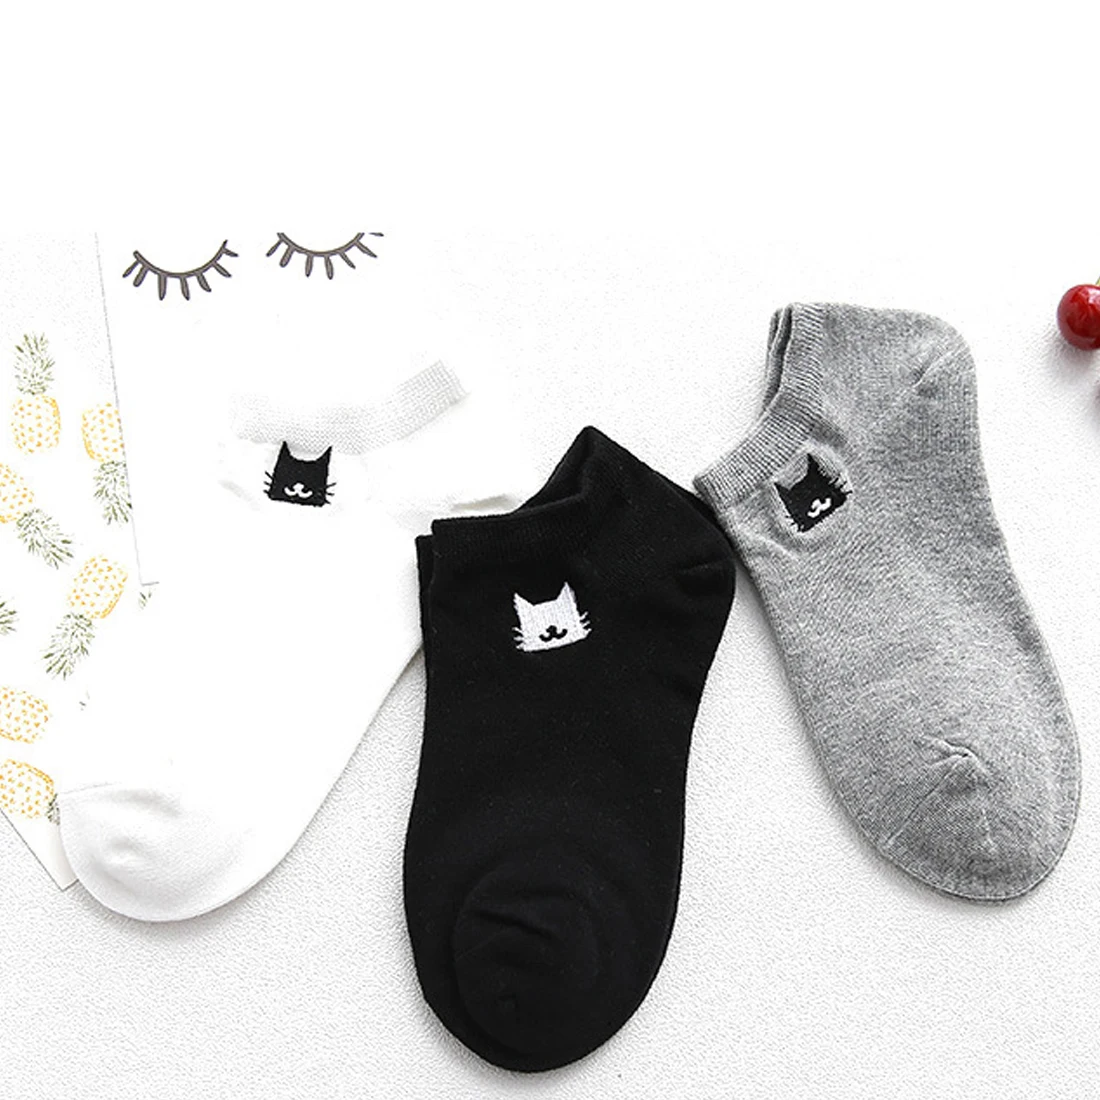 Embroidered Cat Boat Socks Spring Summer Warm Comfortable Breathable Wild Cotton Skin-friendly Women Socks